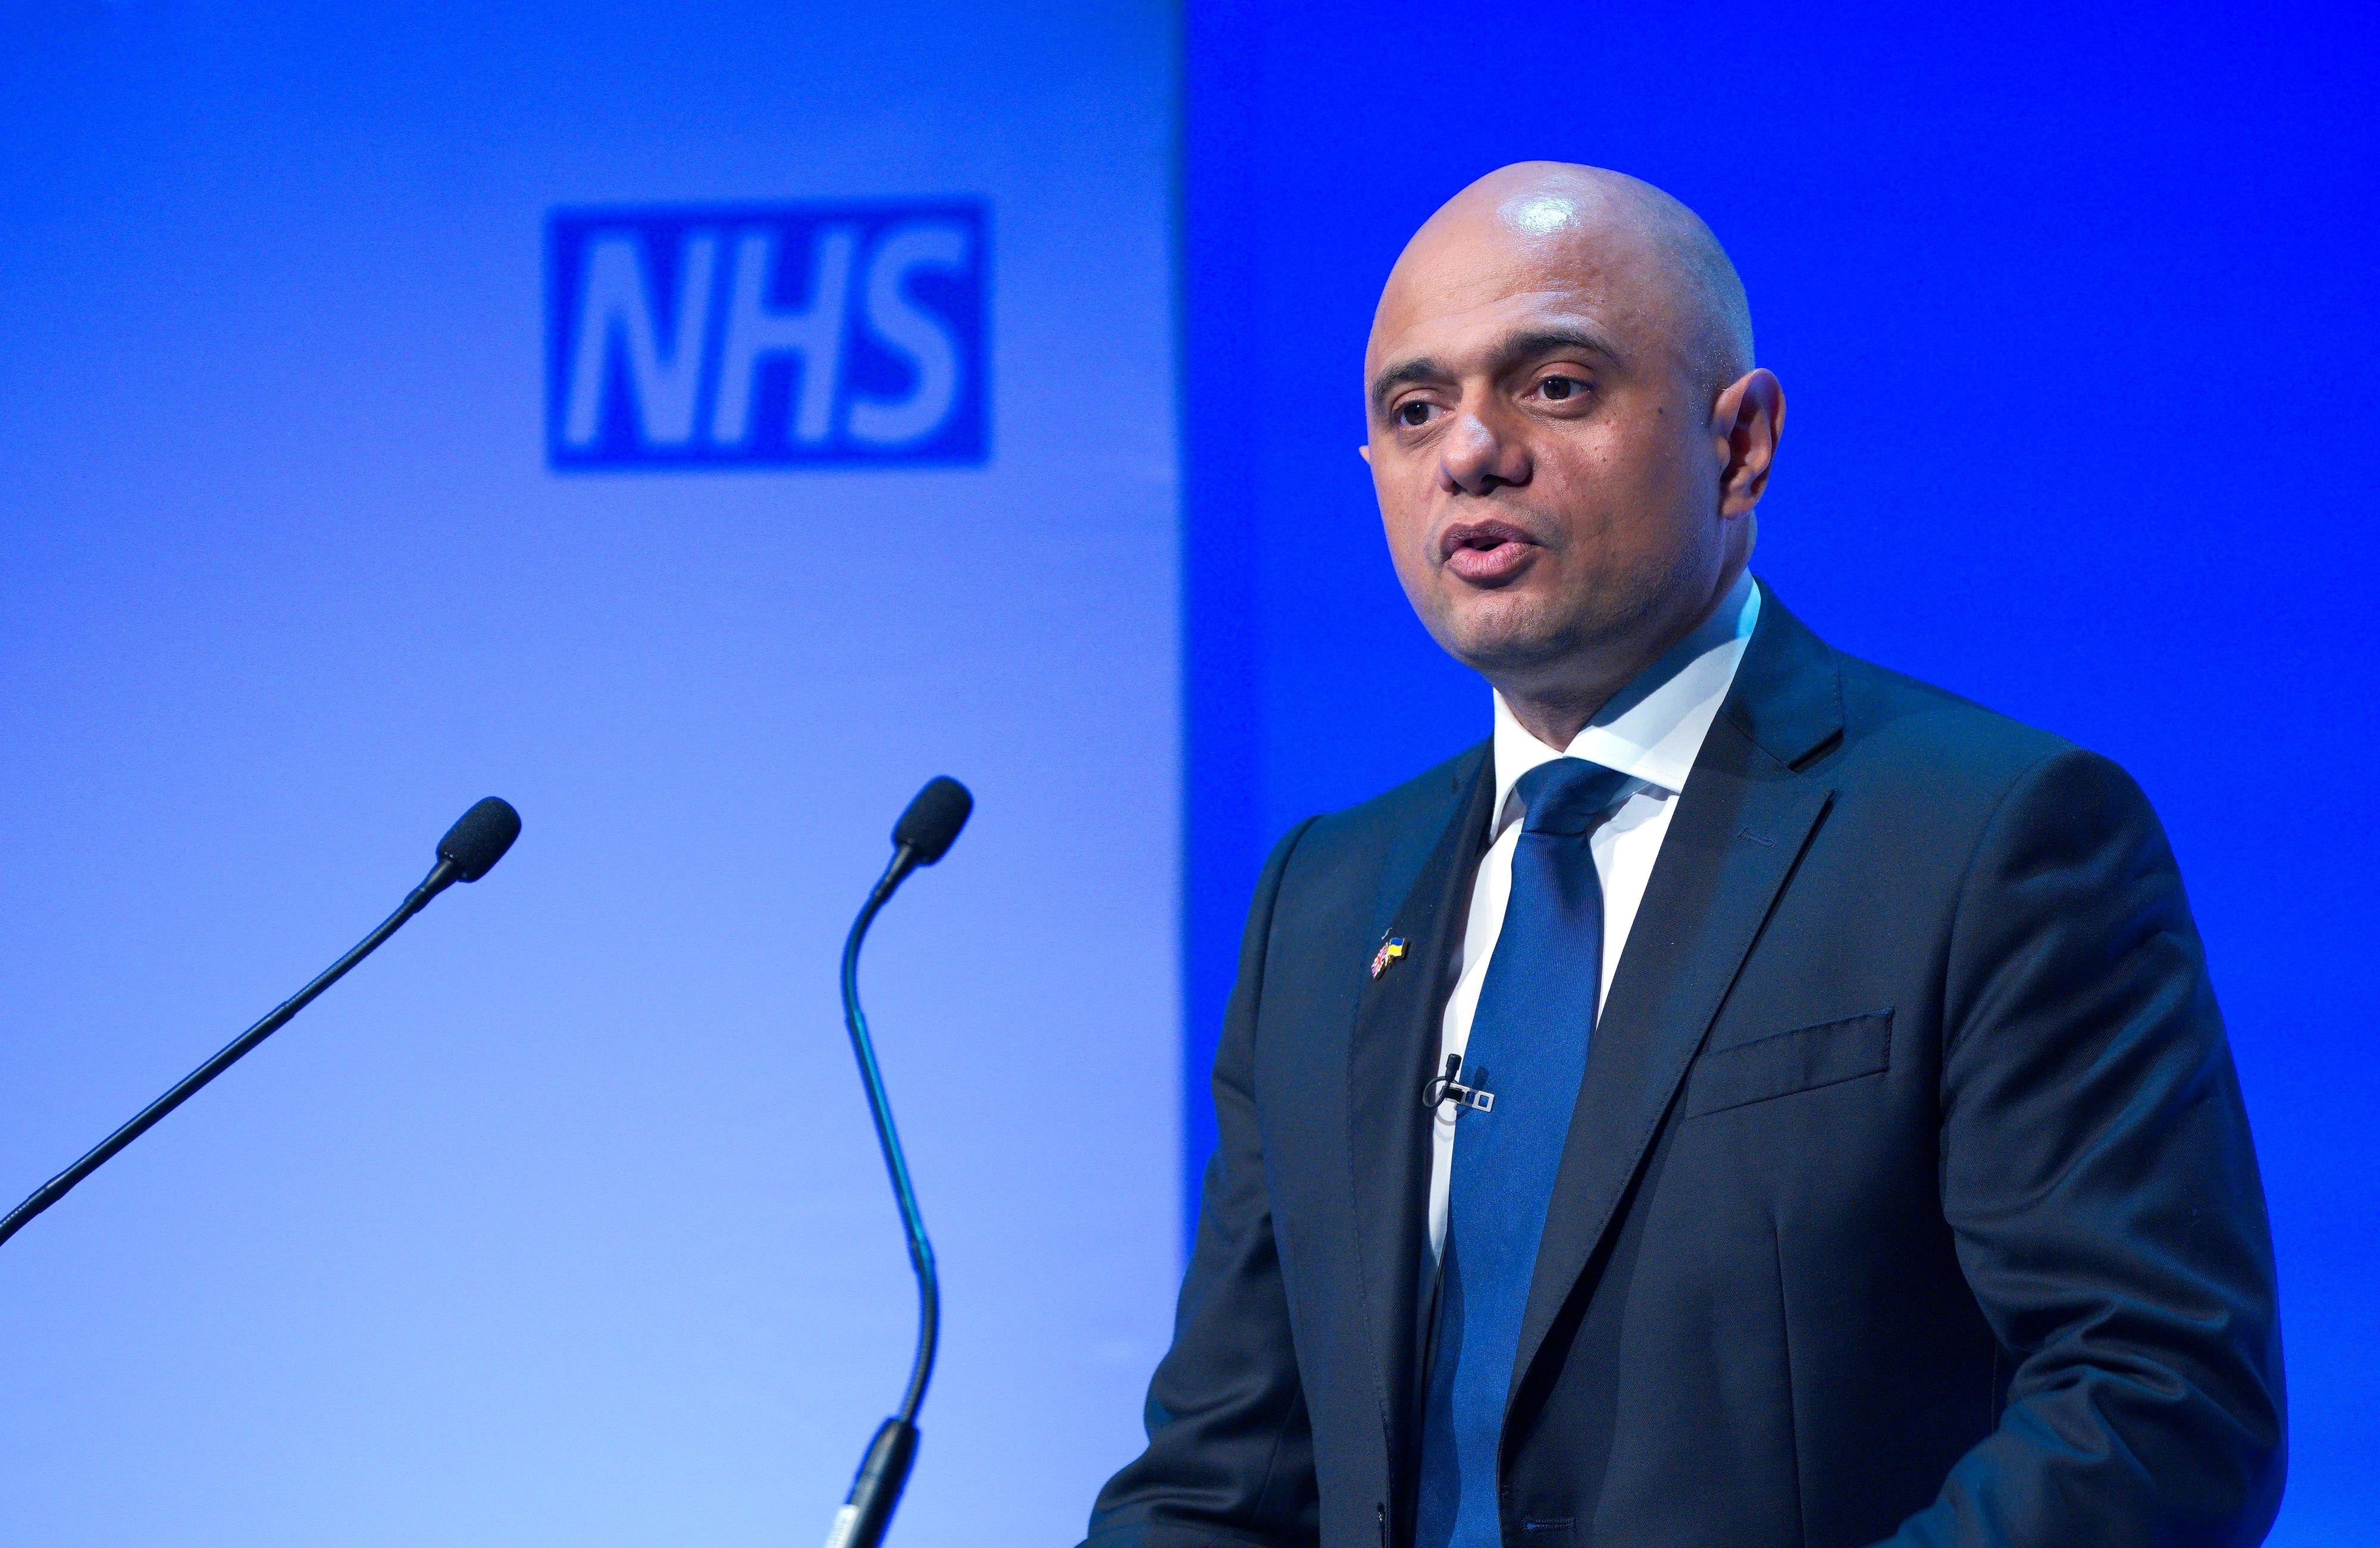 Health secretary Sajid Javid speaking during the NHS ConfedExpo at the ACC Liverpool